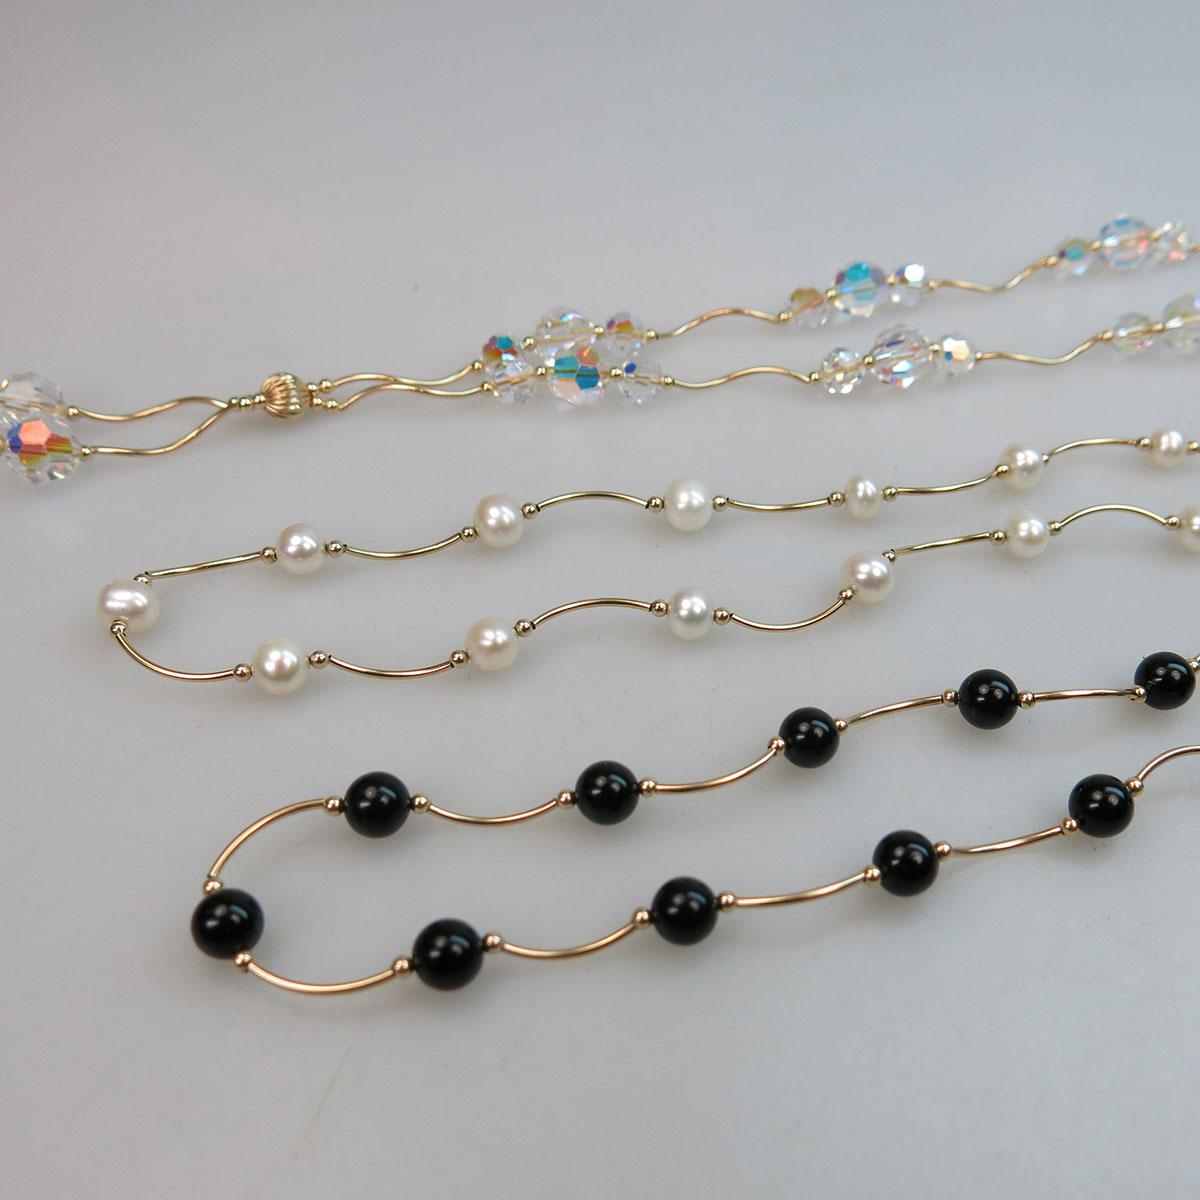 3 x 14k Yellow Gold Necklaces